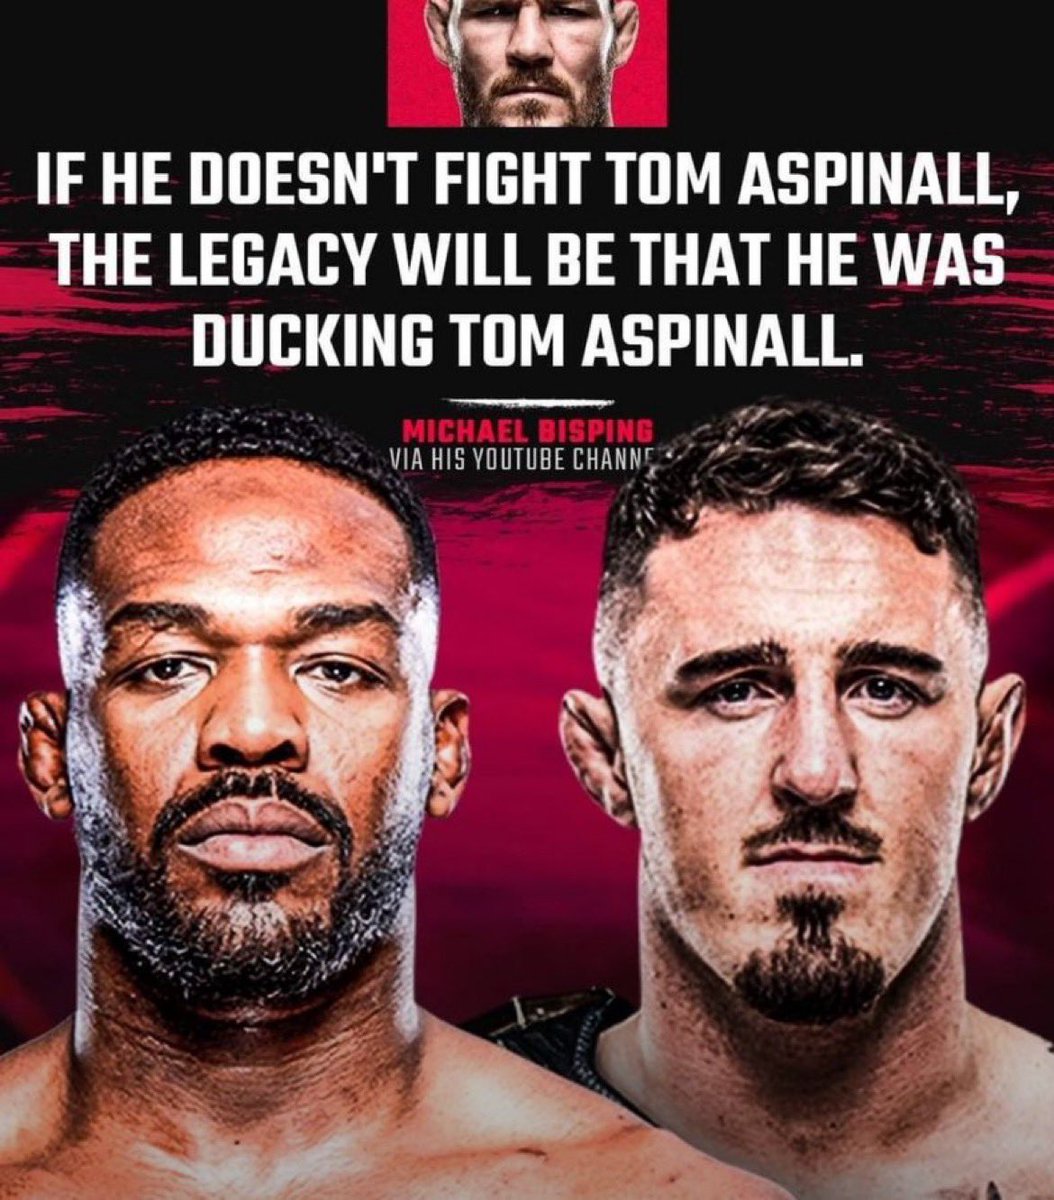 Ofc Bisping is going to say this. British people are the biggest D riders of all time.